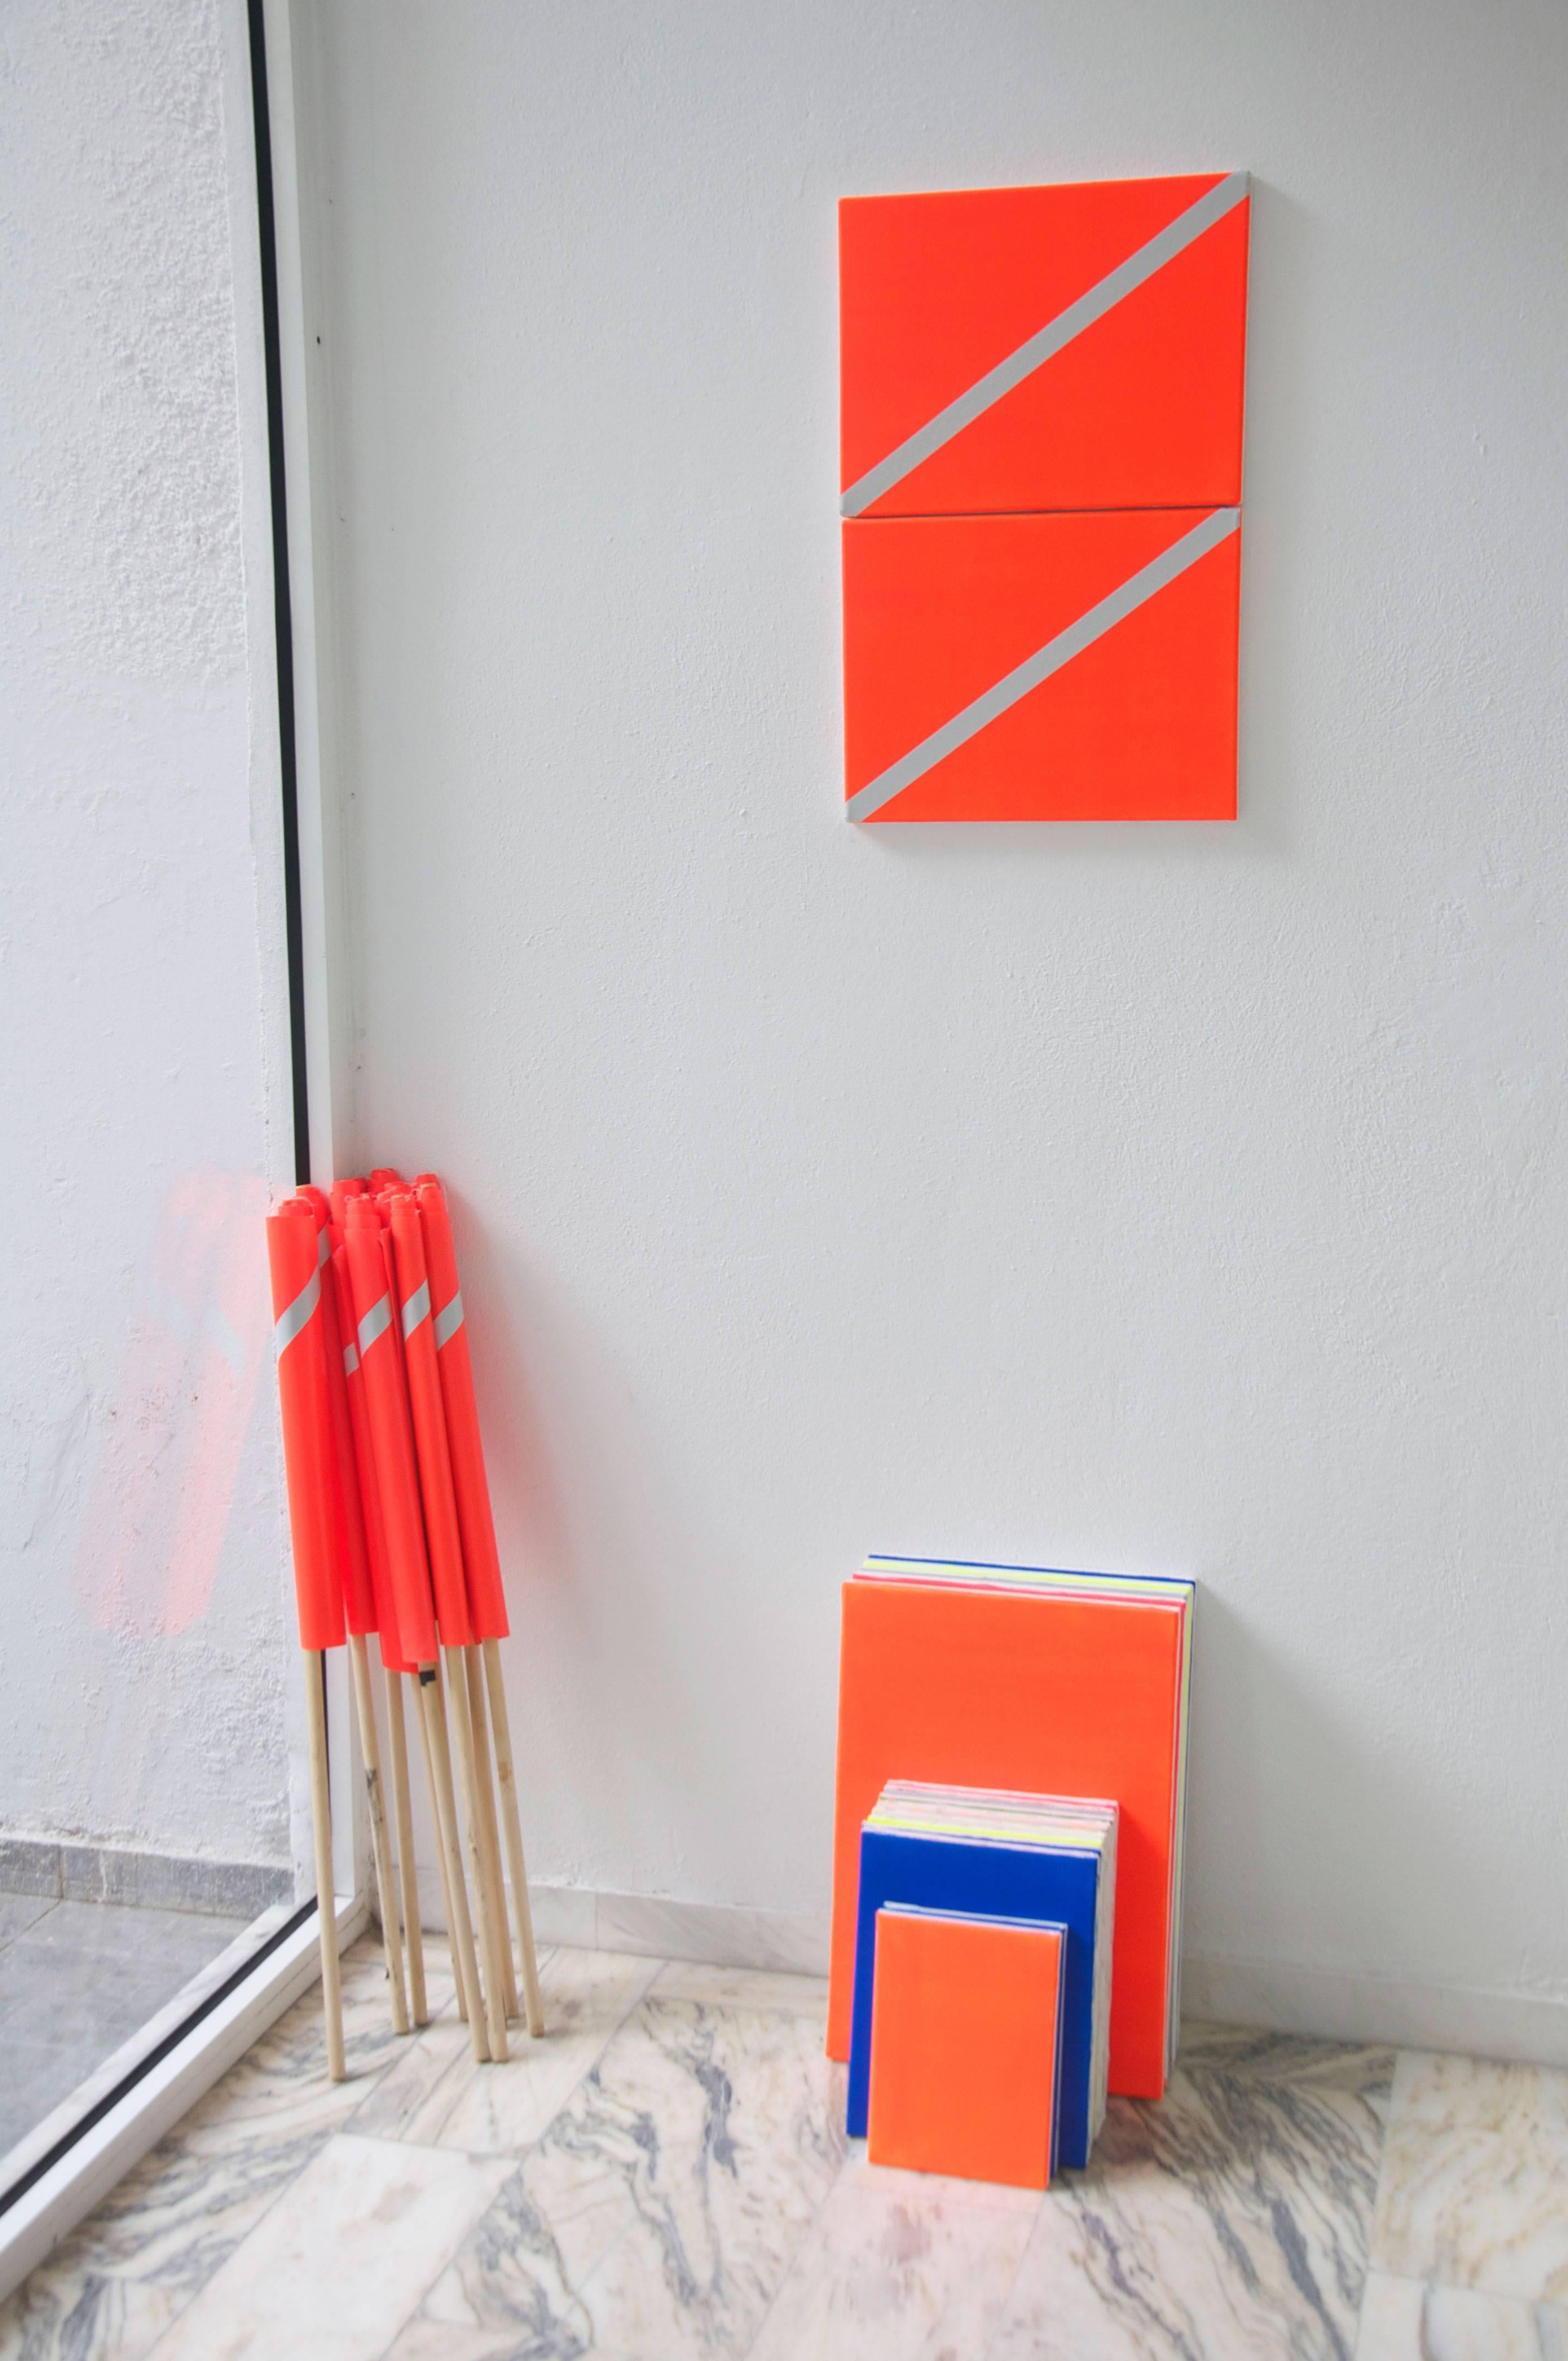 Two Flags - Painting by Leandros Pigades